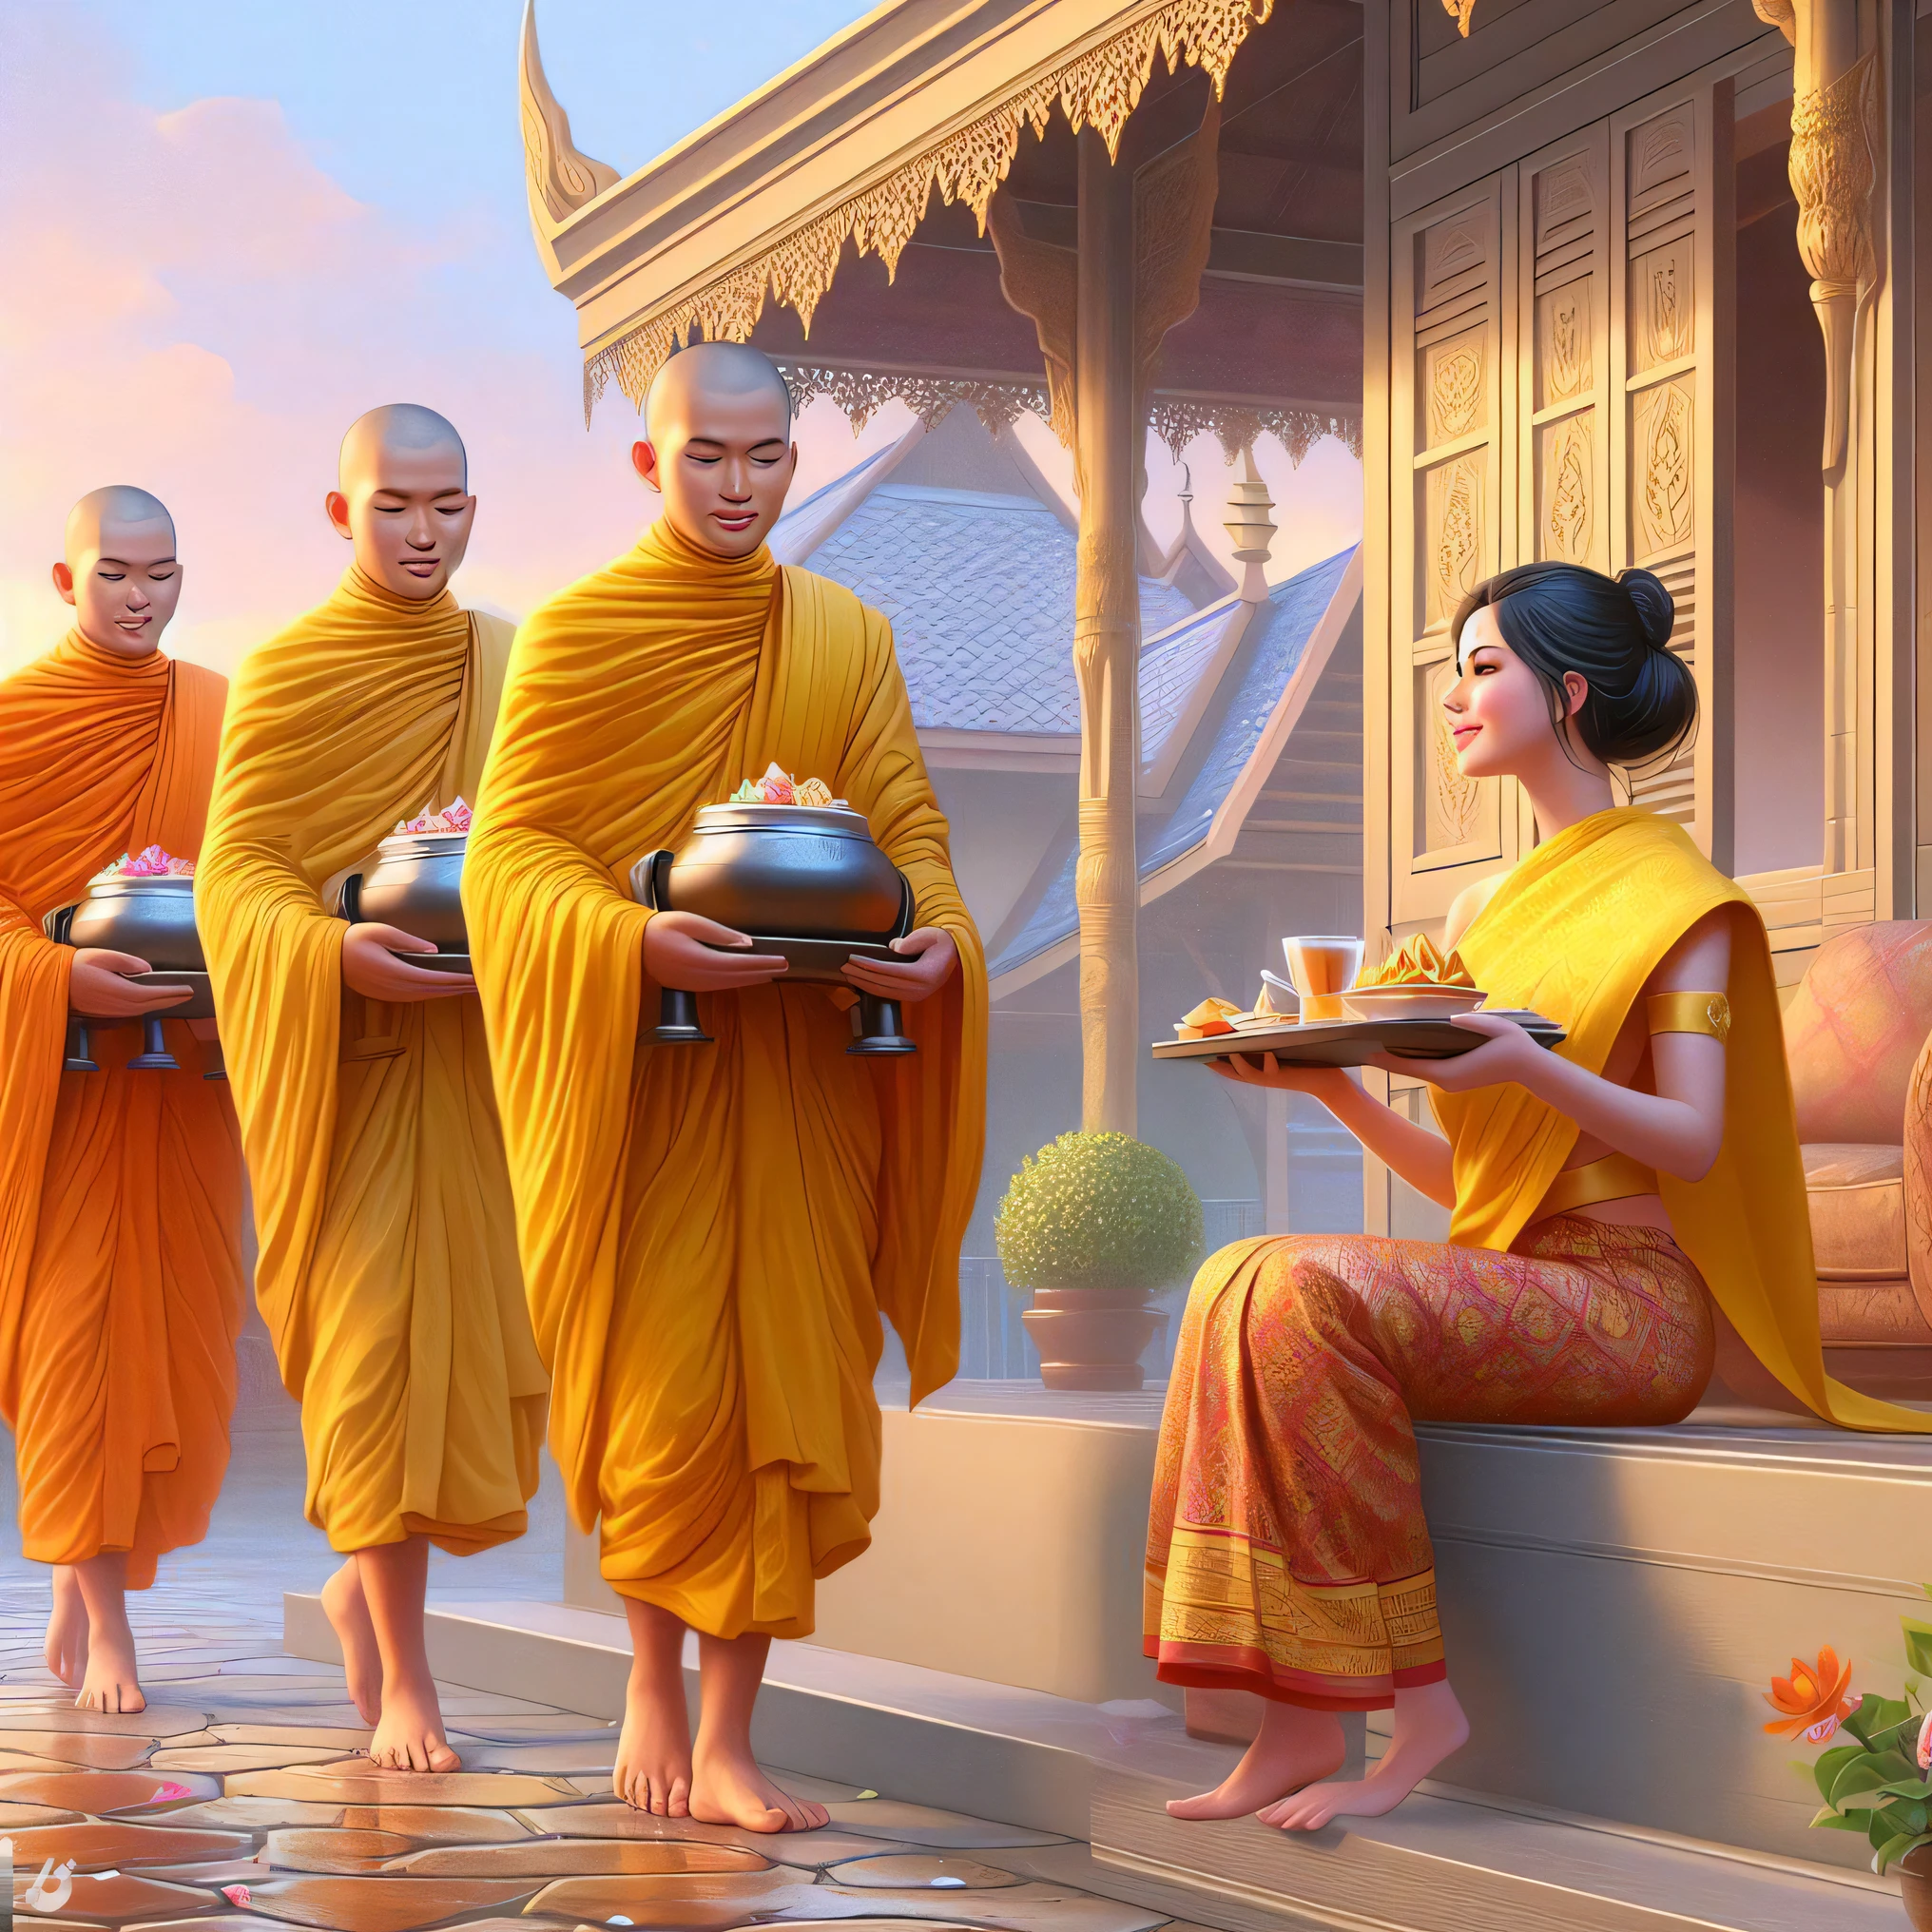 three monks are holding trays of food and a woman is sitting on a step, tithi luadthong, yellow robes, monk clothes, thailand art, buddhism, by John La Gatta, buddhist, monks, beautiful depiction, with yellow cloths, wearing flowing robes, buddhist monk, by Alexander Kucharsky, eastern art style, concept art of a monk